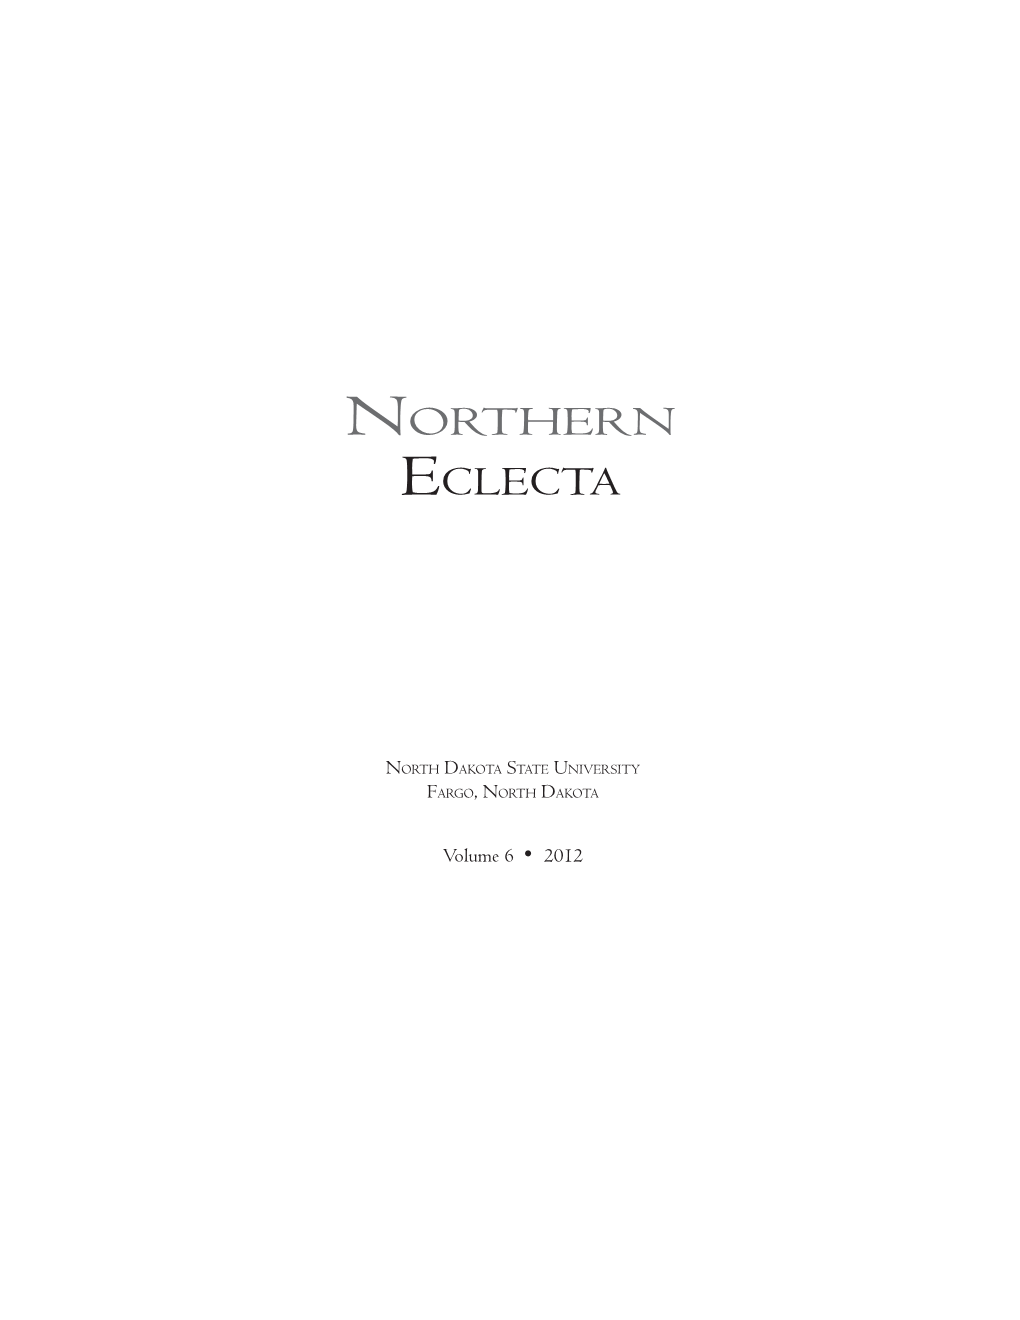 Northern Eclecta